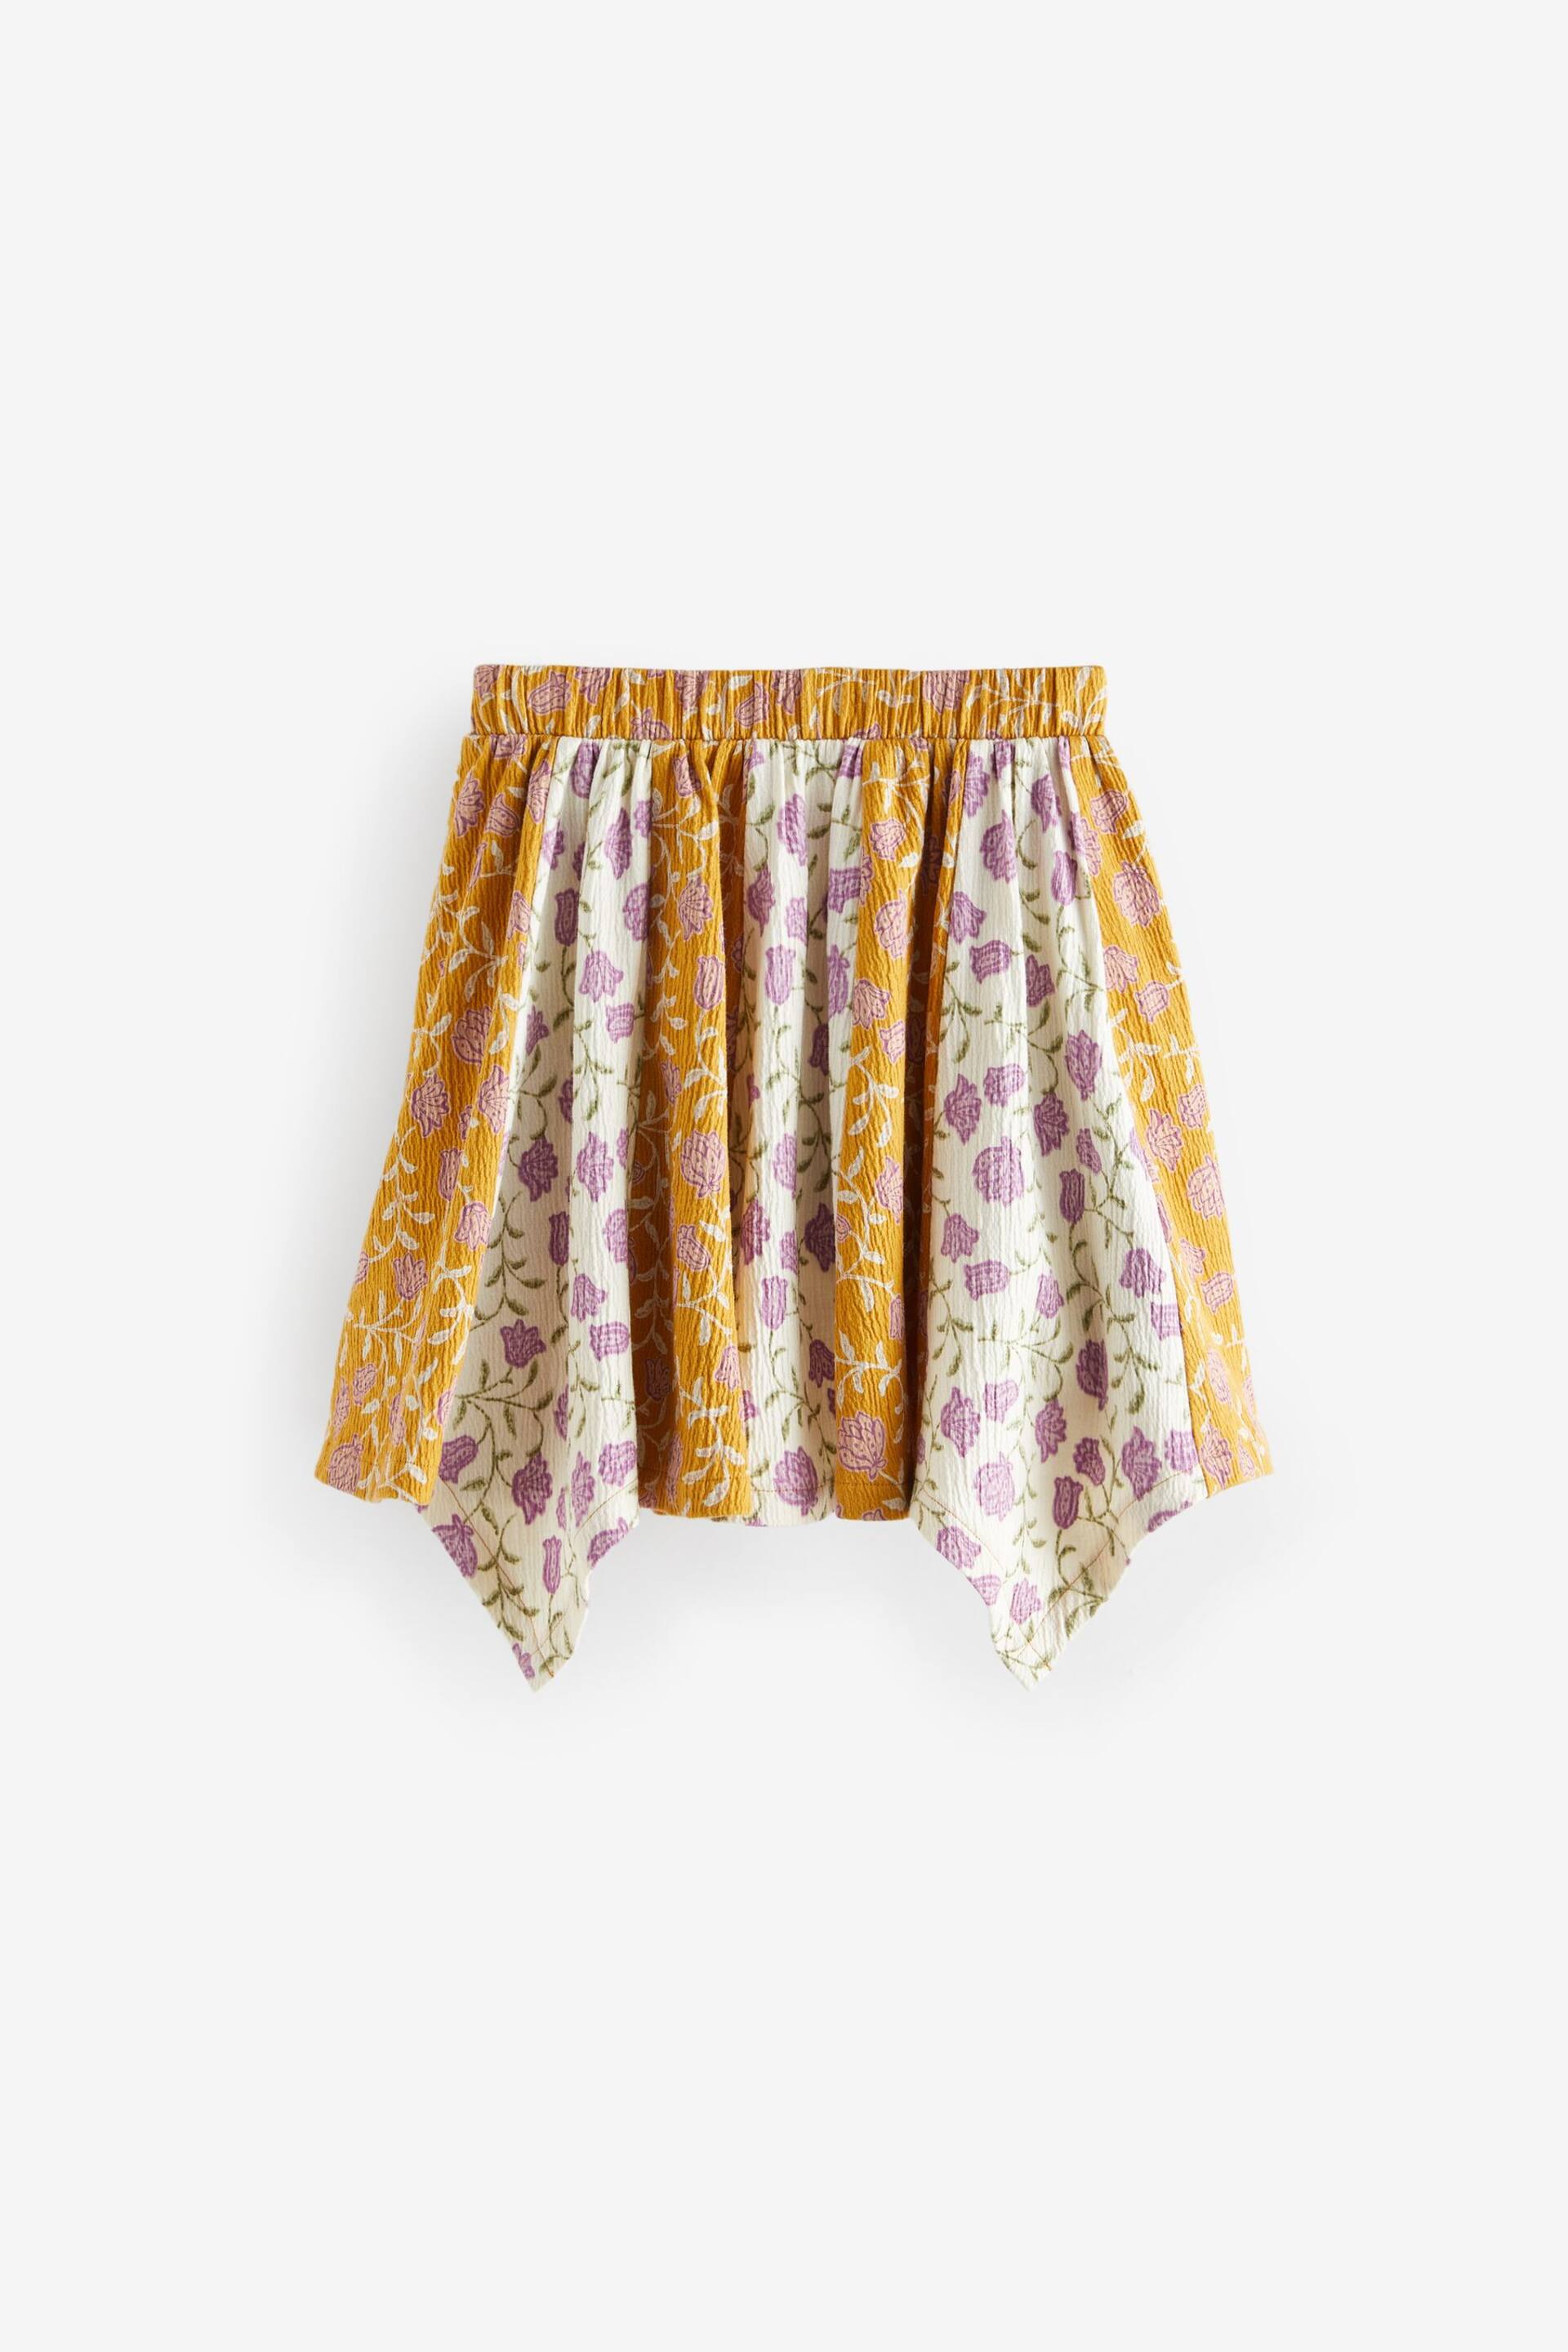 Ochre Yellow Floral Print Skirt (3-16yrs) - Image 5 of 8